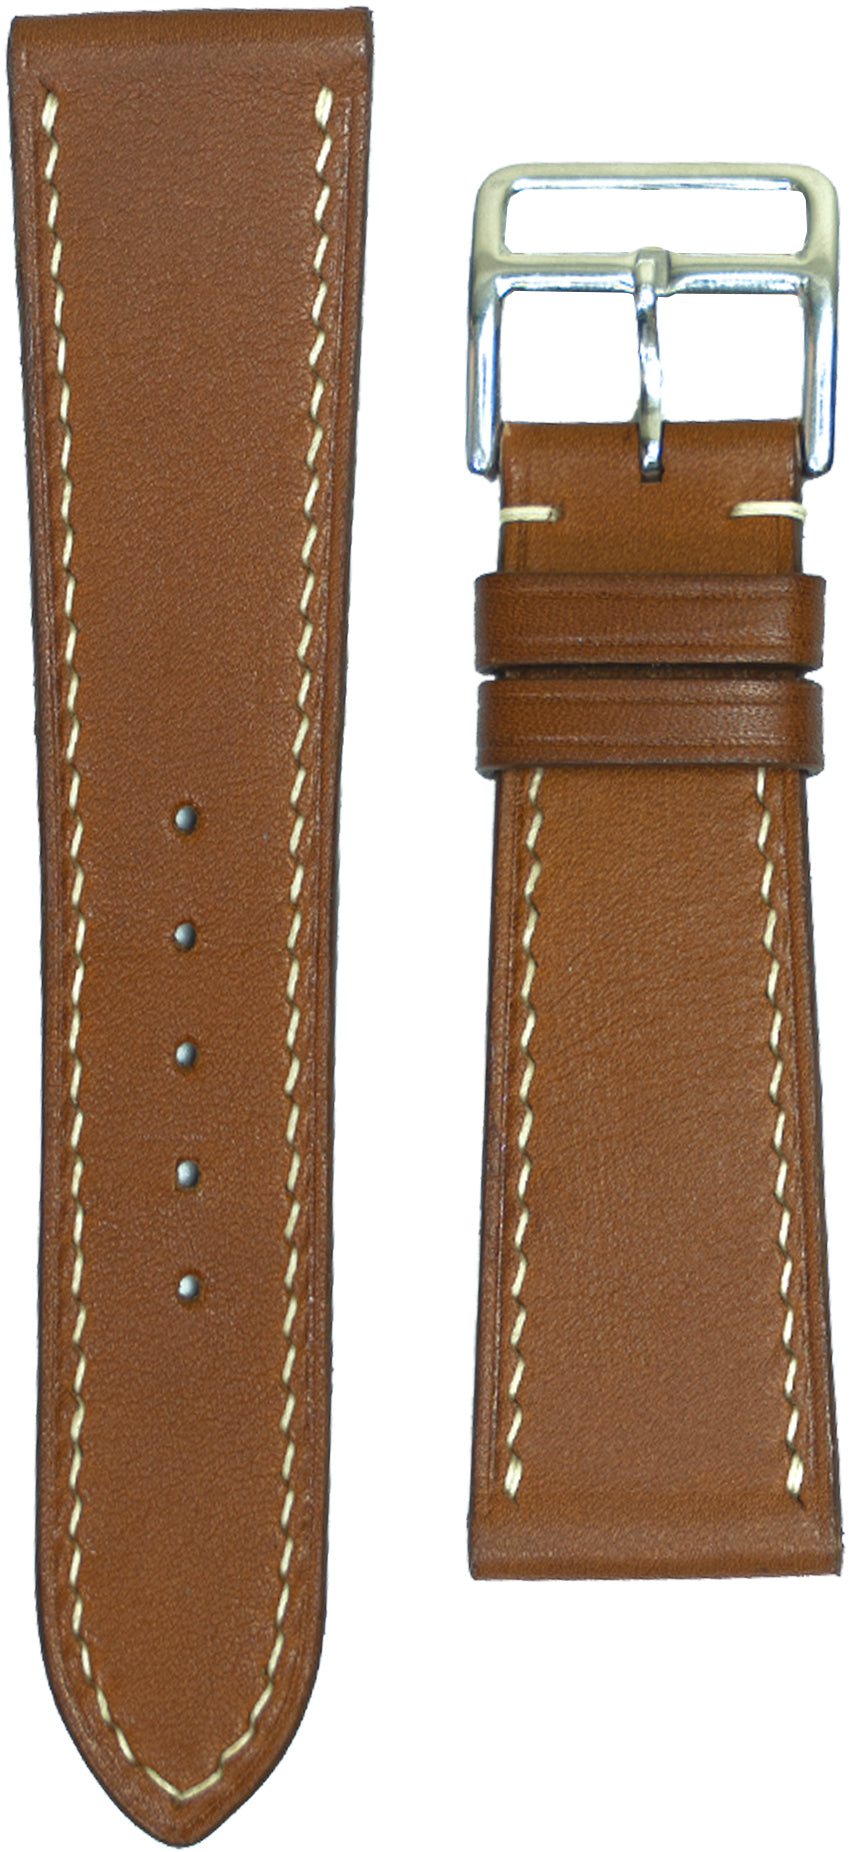 Barenia Leather Watch Strap - Brown